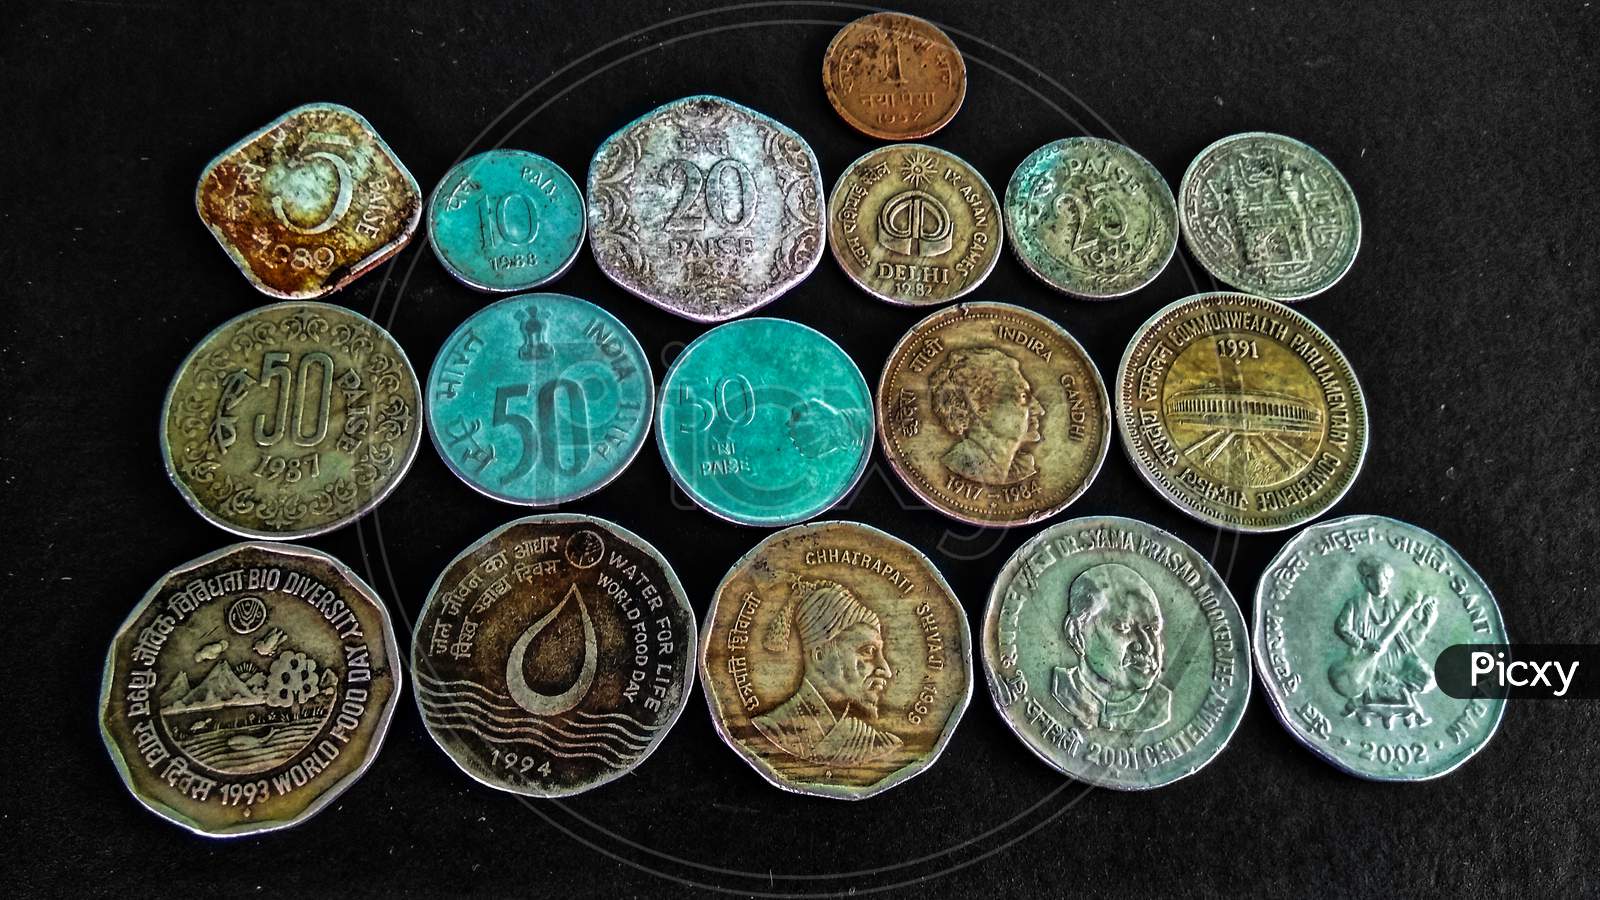 All Indian Old Coins